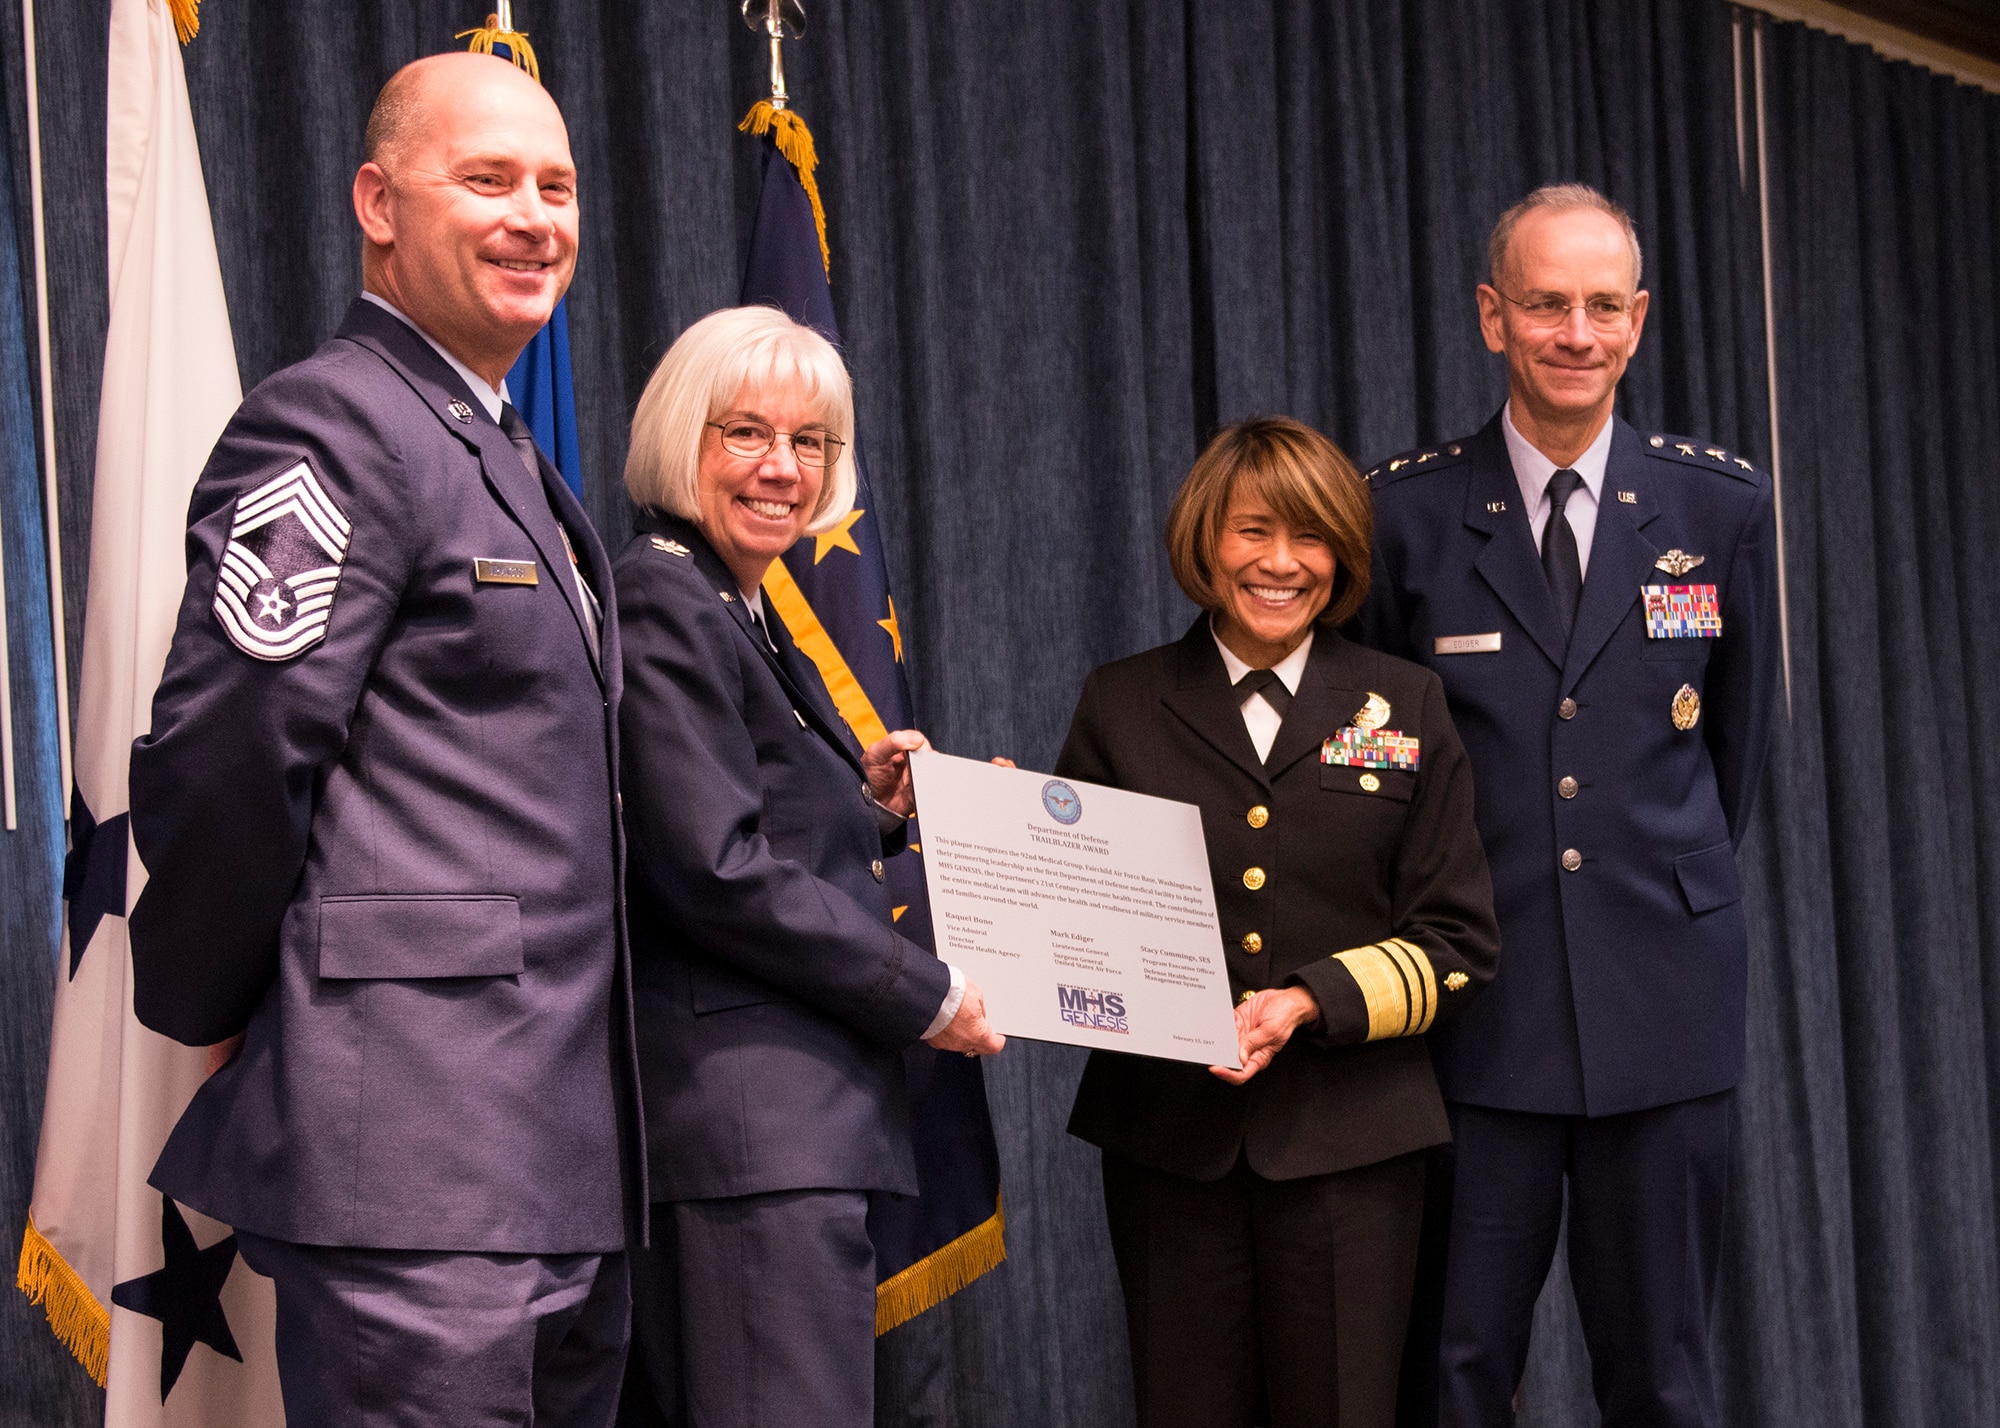 (From left to right) Chief Master Sgt. Willard Armagost, 92nd Medical Group superintendent, Col. Meg Carey, 92nd MDG commander, Navy Vice Admiral Raquel Bono, Defense Health Agency director, and Lt. Gen. Mark Ediger, U.S. Air Force surgeon general, pose with a plaque in honor of the MHS Genesis "go-live" Feb. 15, 2017, at Fairchild Air Force Base, Wash. MHS Genesis is a Department of Defense wide initiative to move to an all digital, networked medical record system. (U.S. Air Force photo/Airman 1st Class Ryan Lackey)